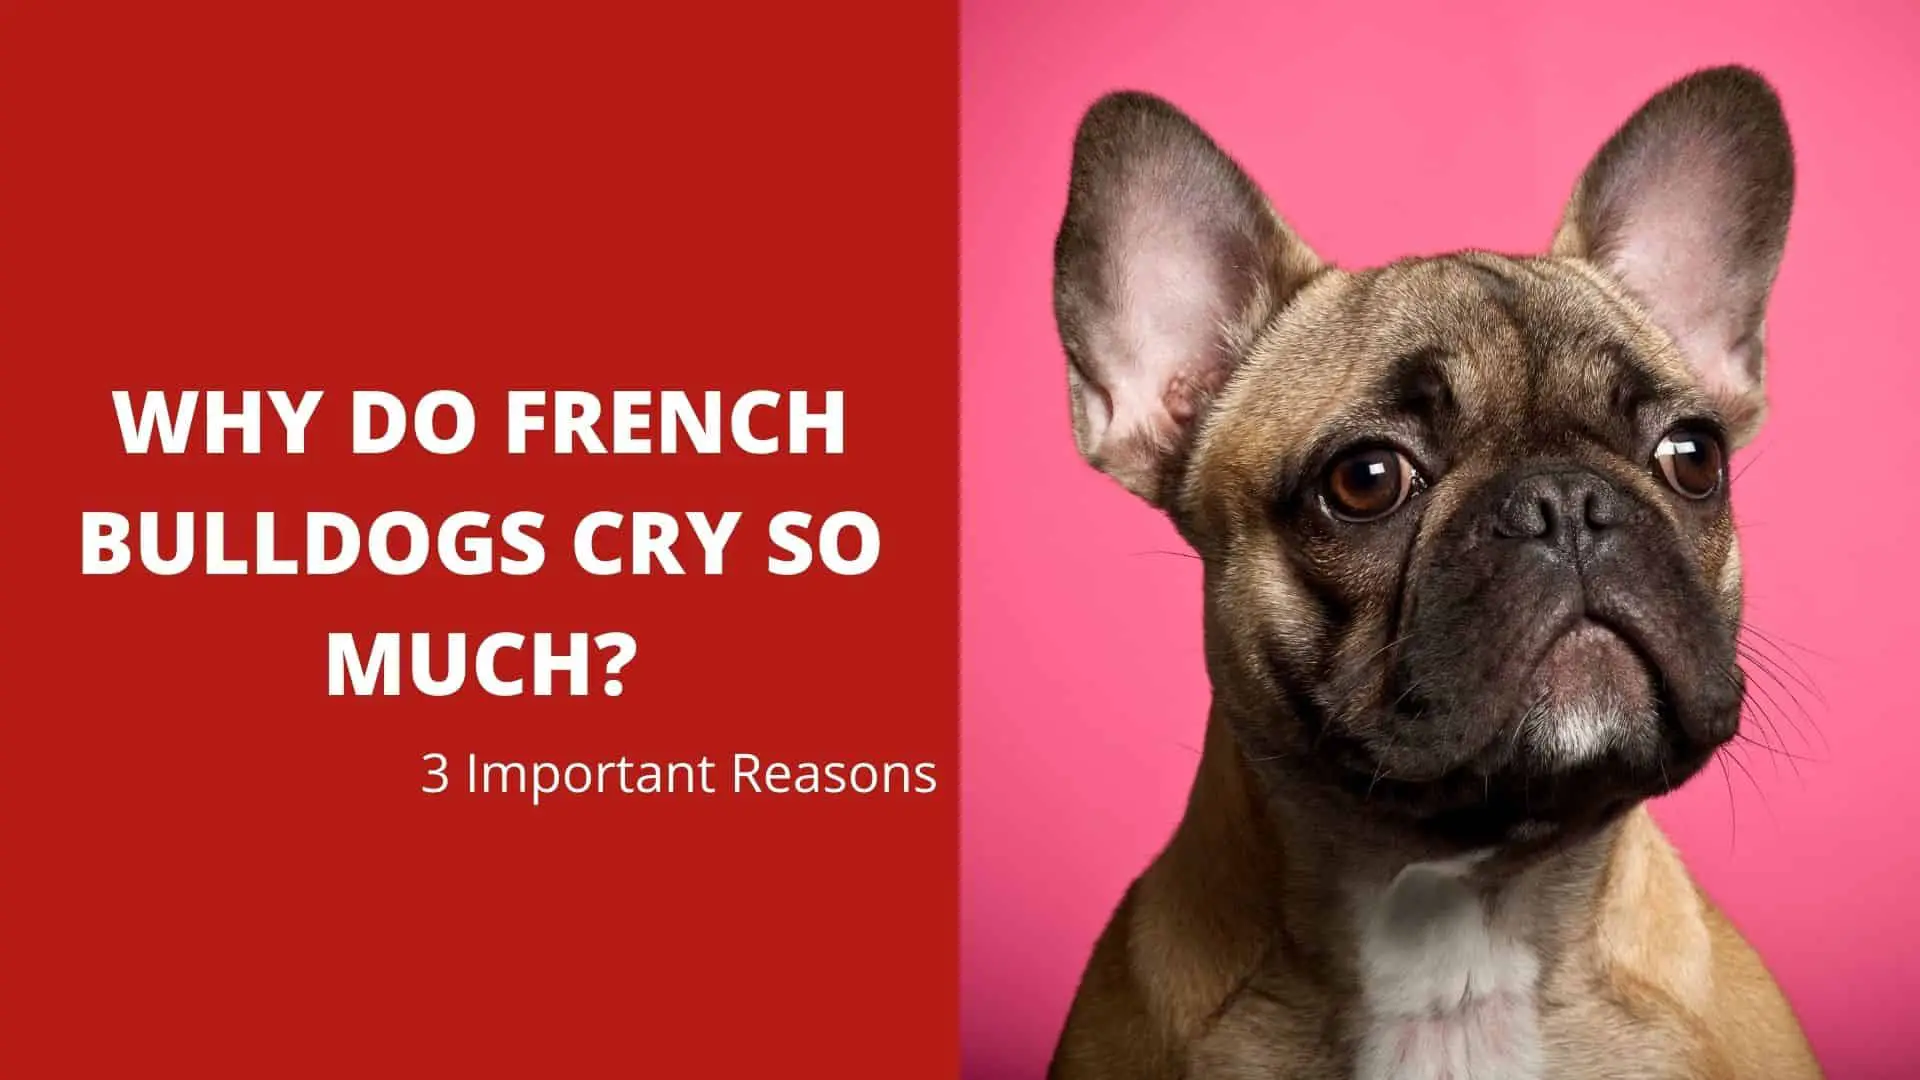 3 Important Reasons – Why Do French Bulldogs Cry So Much?